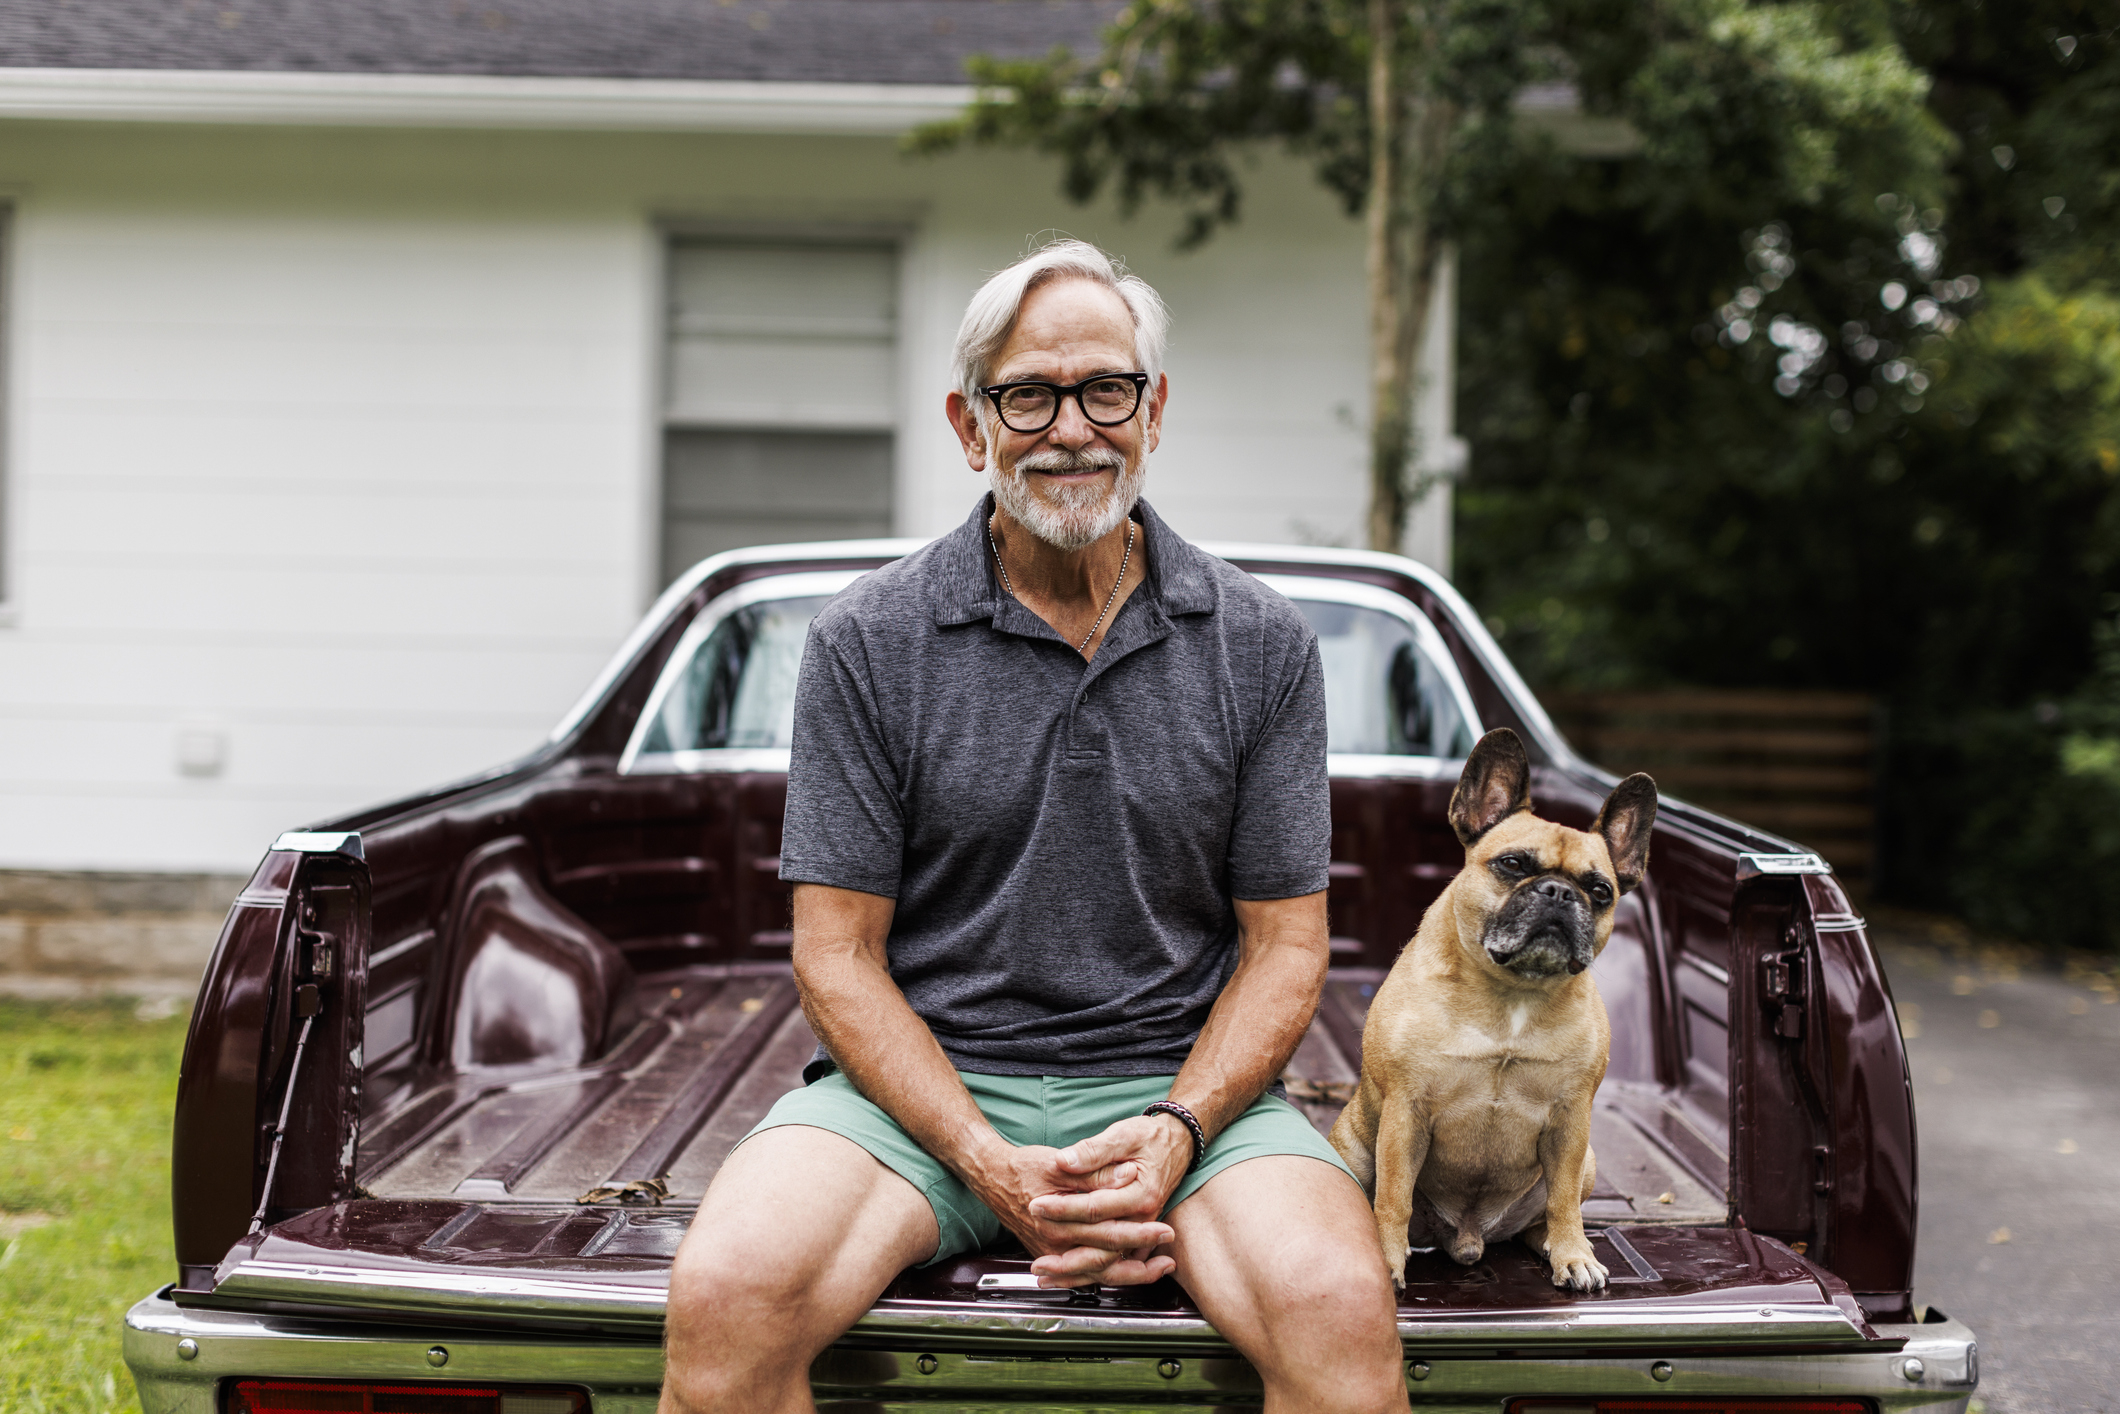 Smiling man and French Bulldog sitting on the trunk of a vintage car with a house in the background